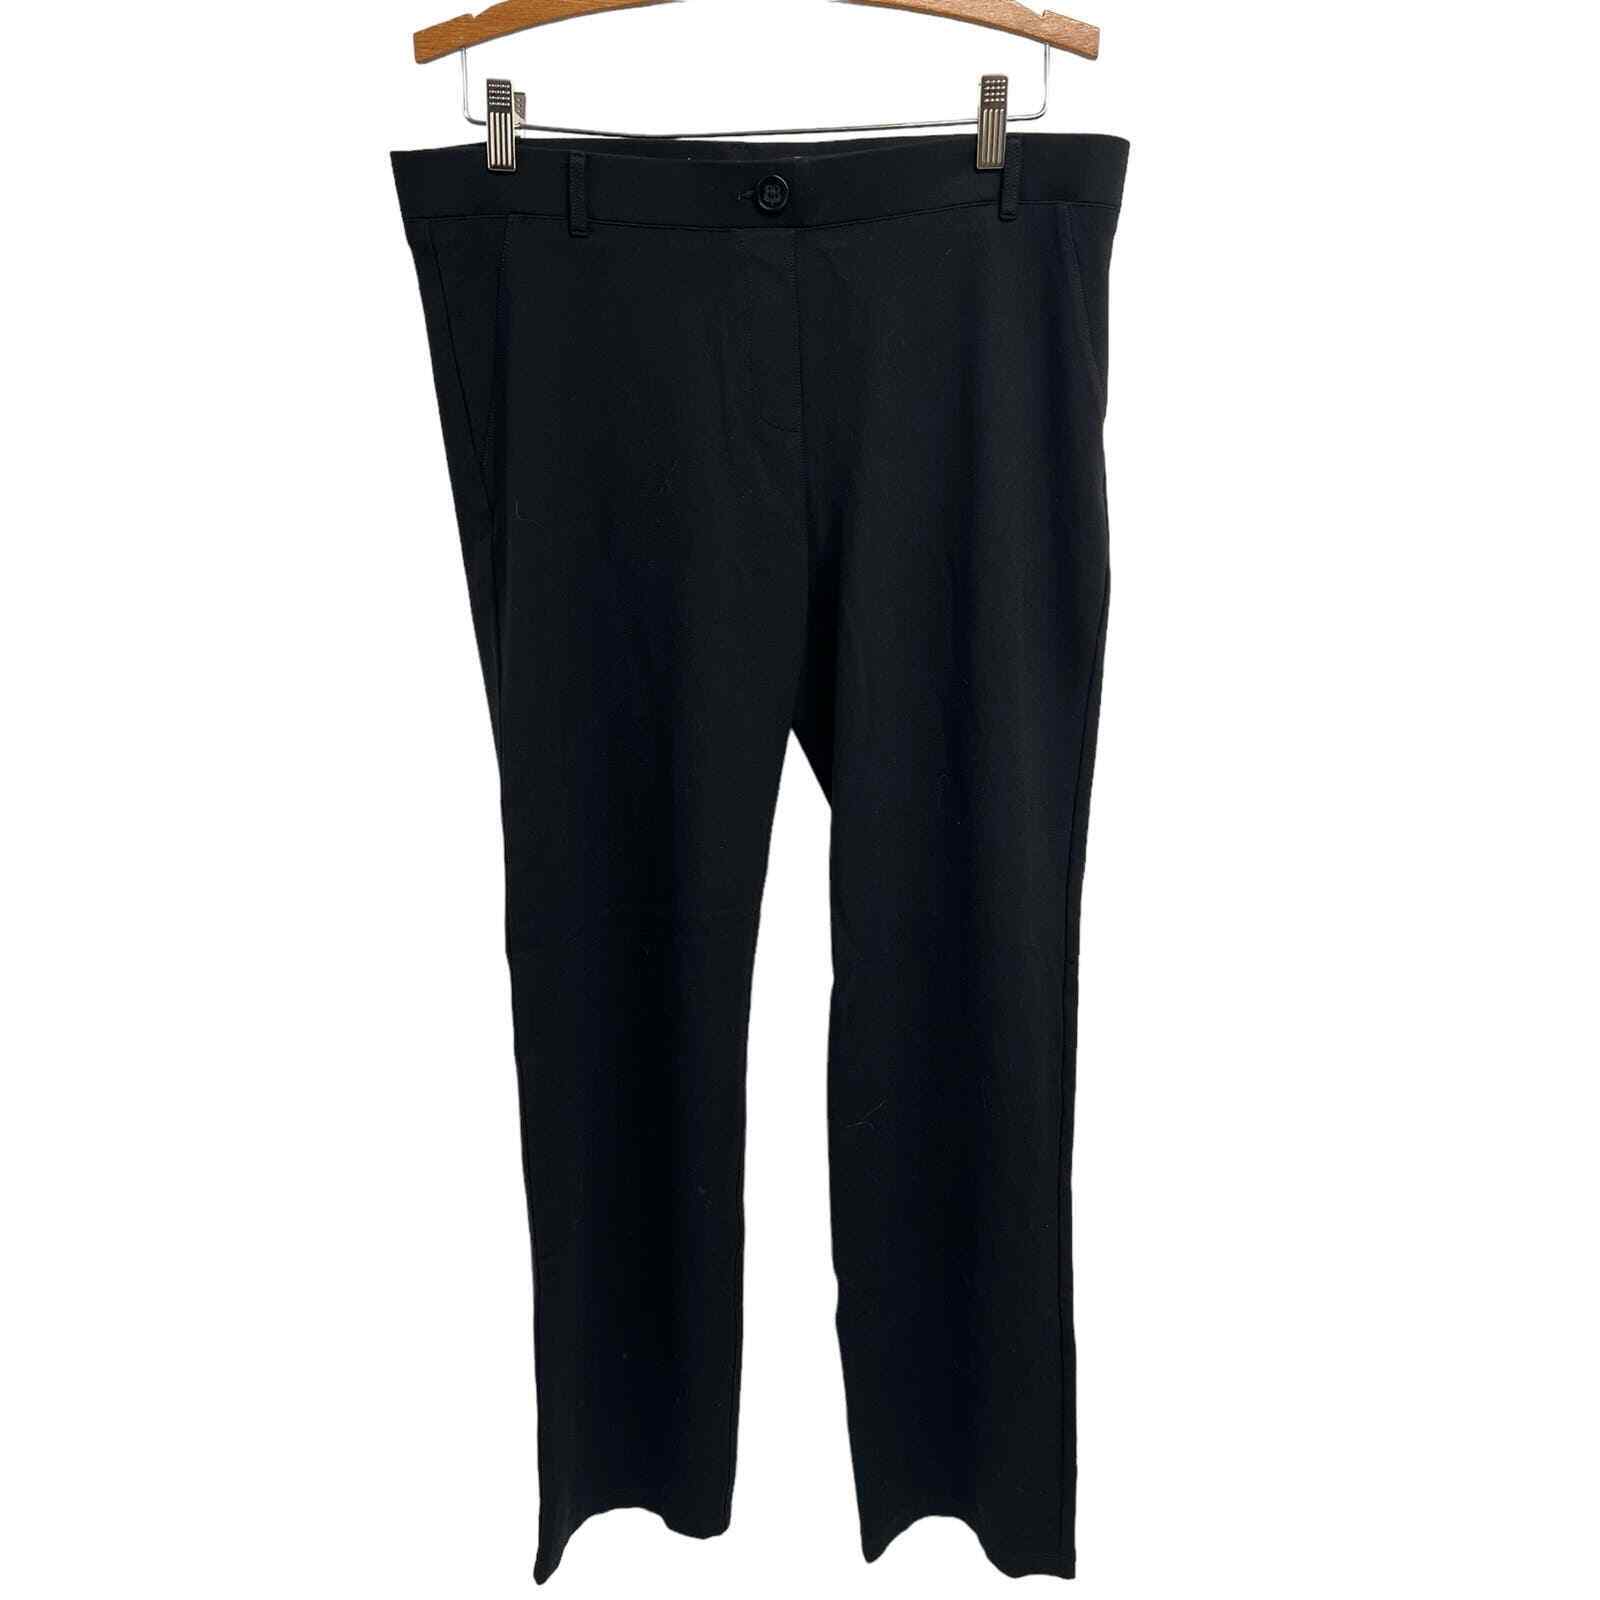 Betabrand Pull On Pants Women’s size XL Black - image 1